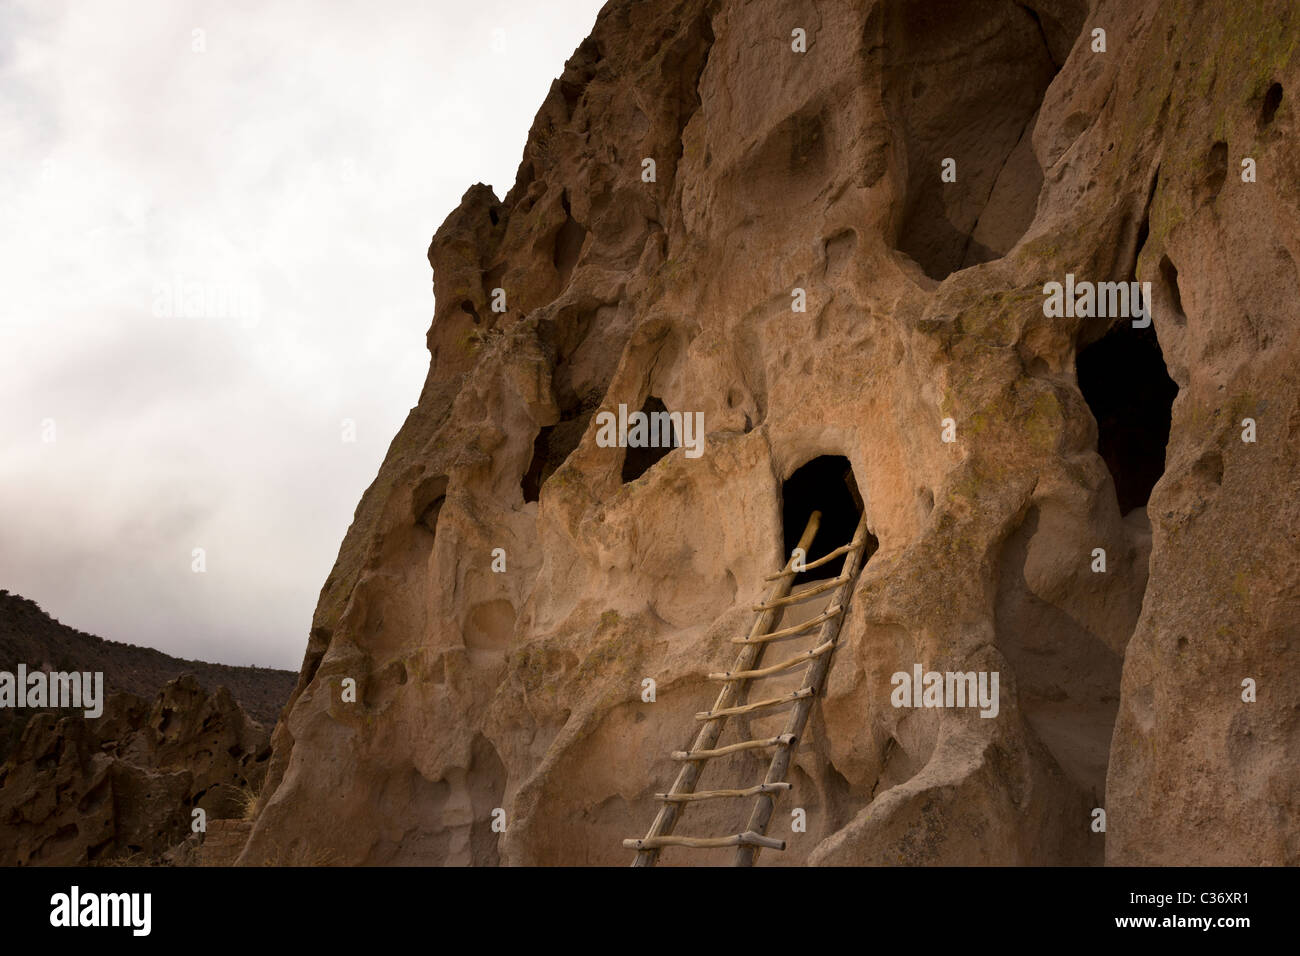 Wooden ladder leading to the Talus Houses, Native American cliff dwelling at Bandelier National Monument in New Mexico, USA. Stock Photo